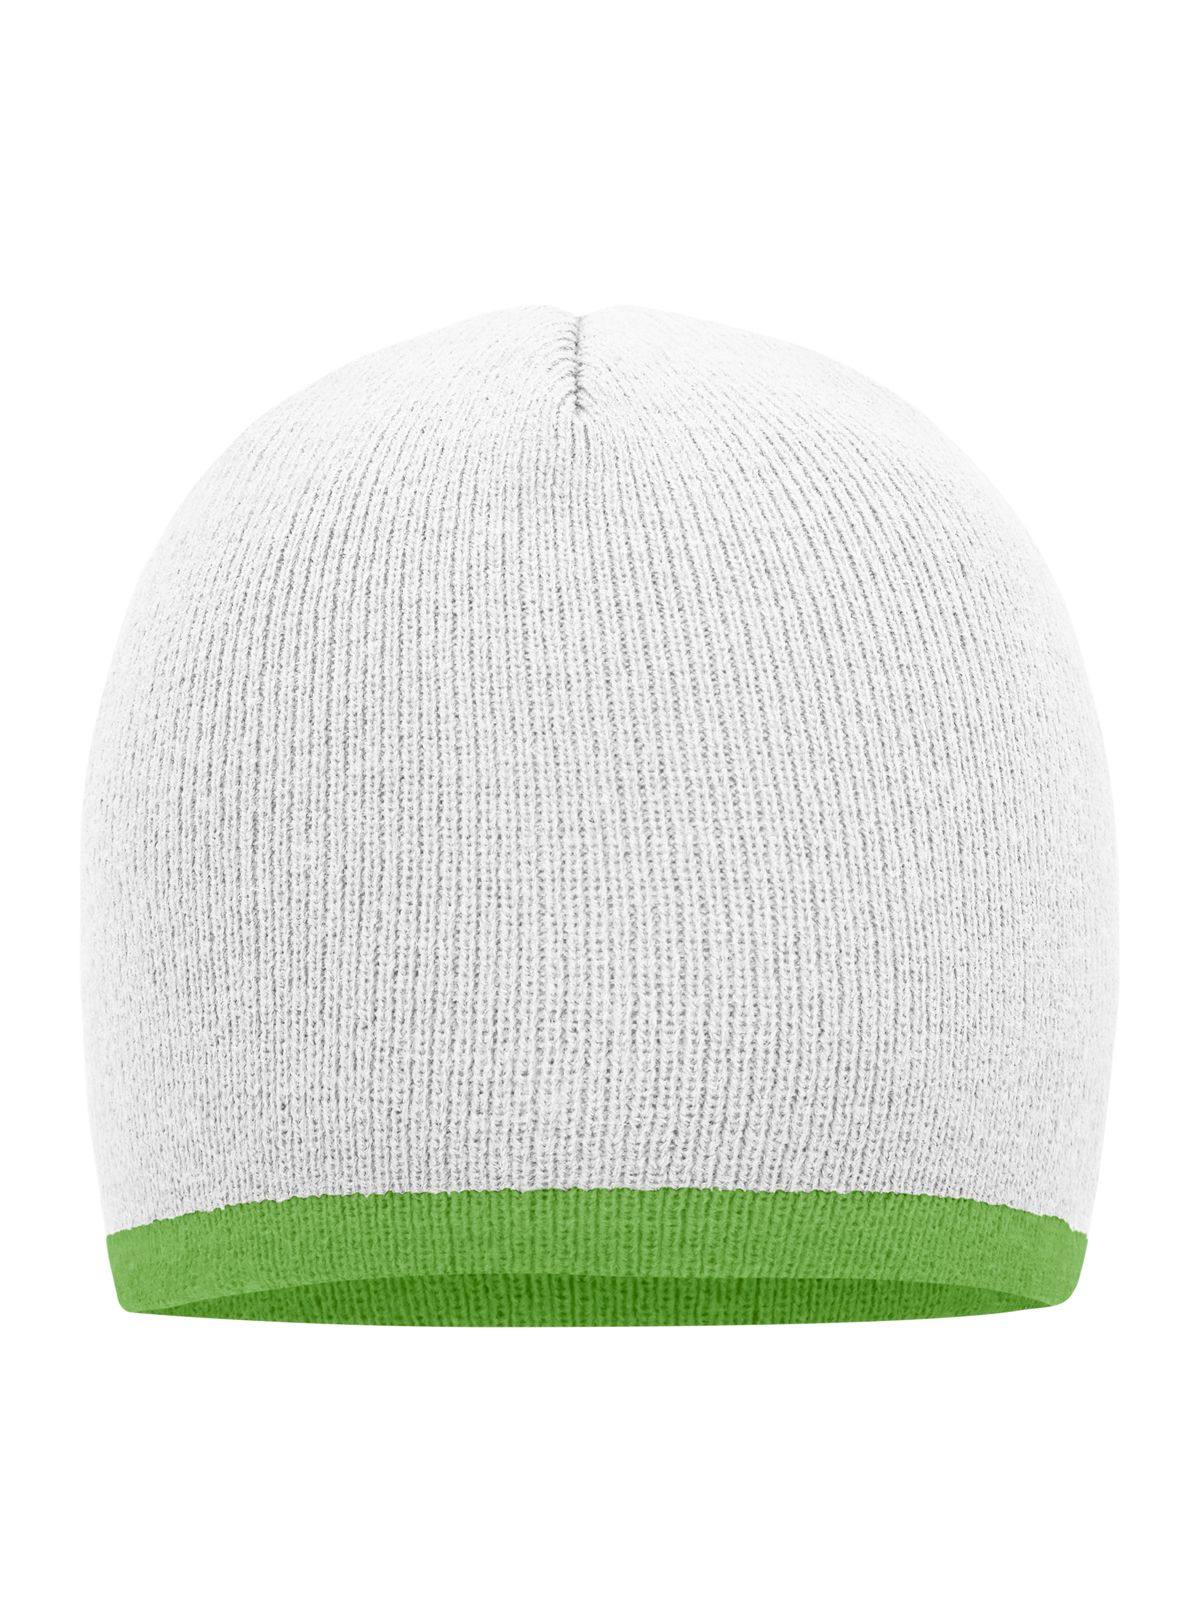 beanie-with-contrasting-border-white-lime-green.webp